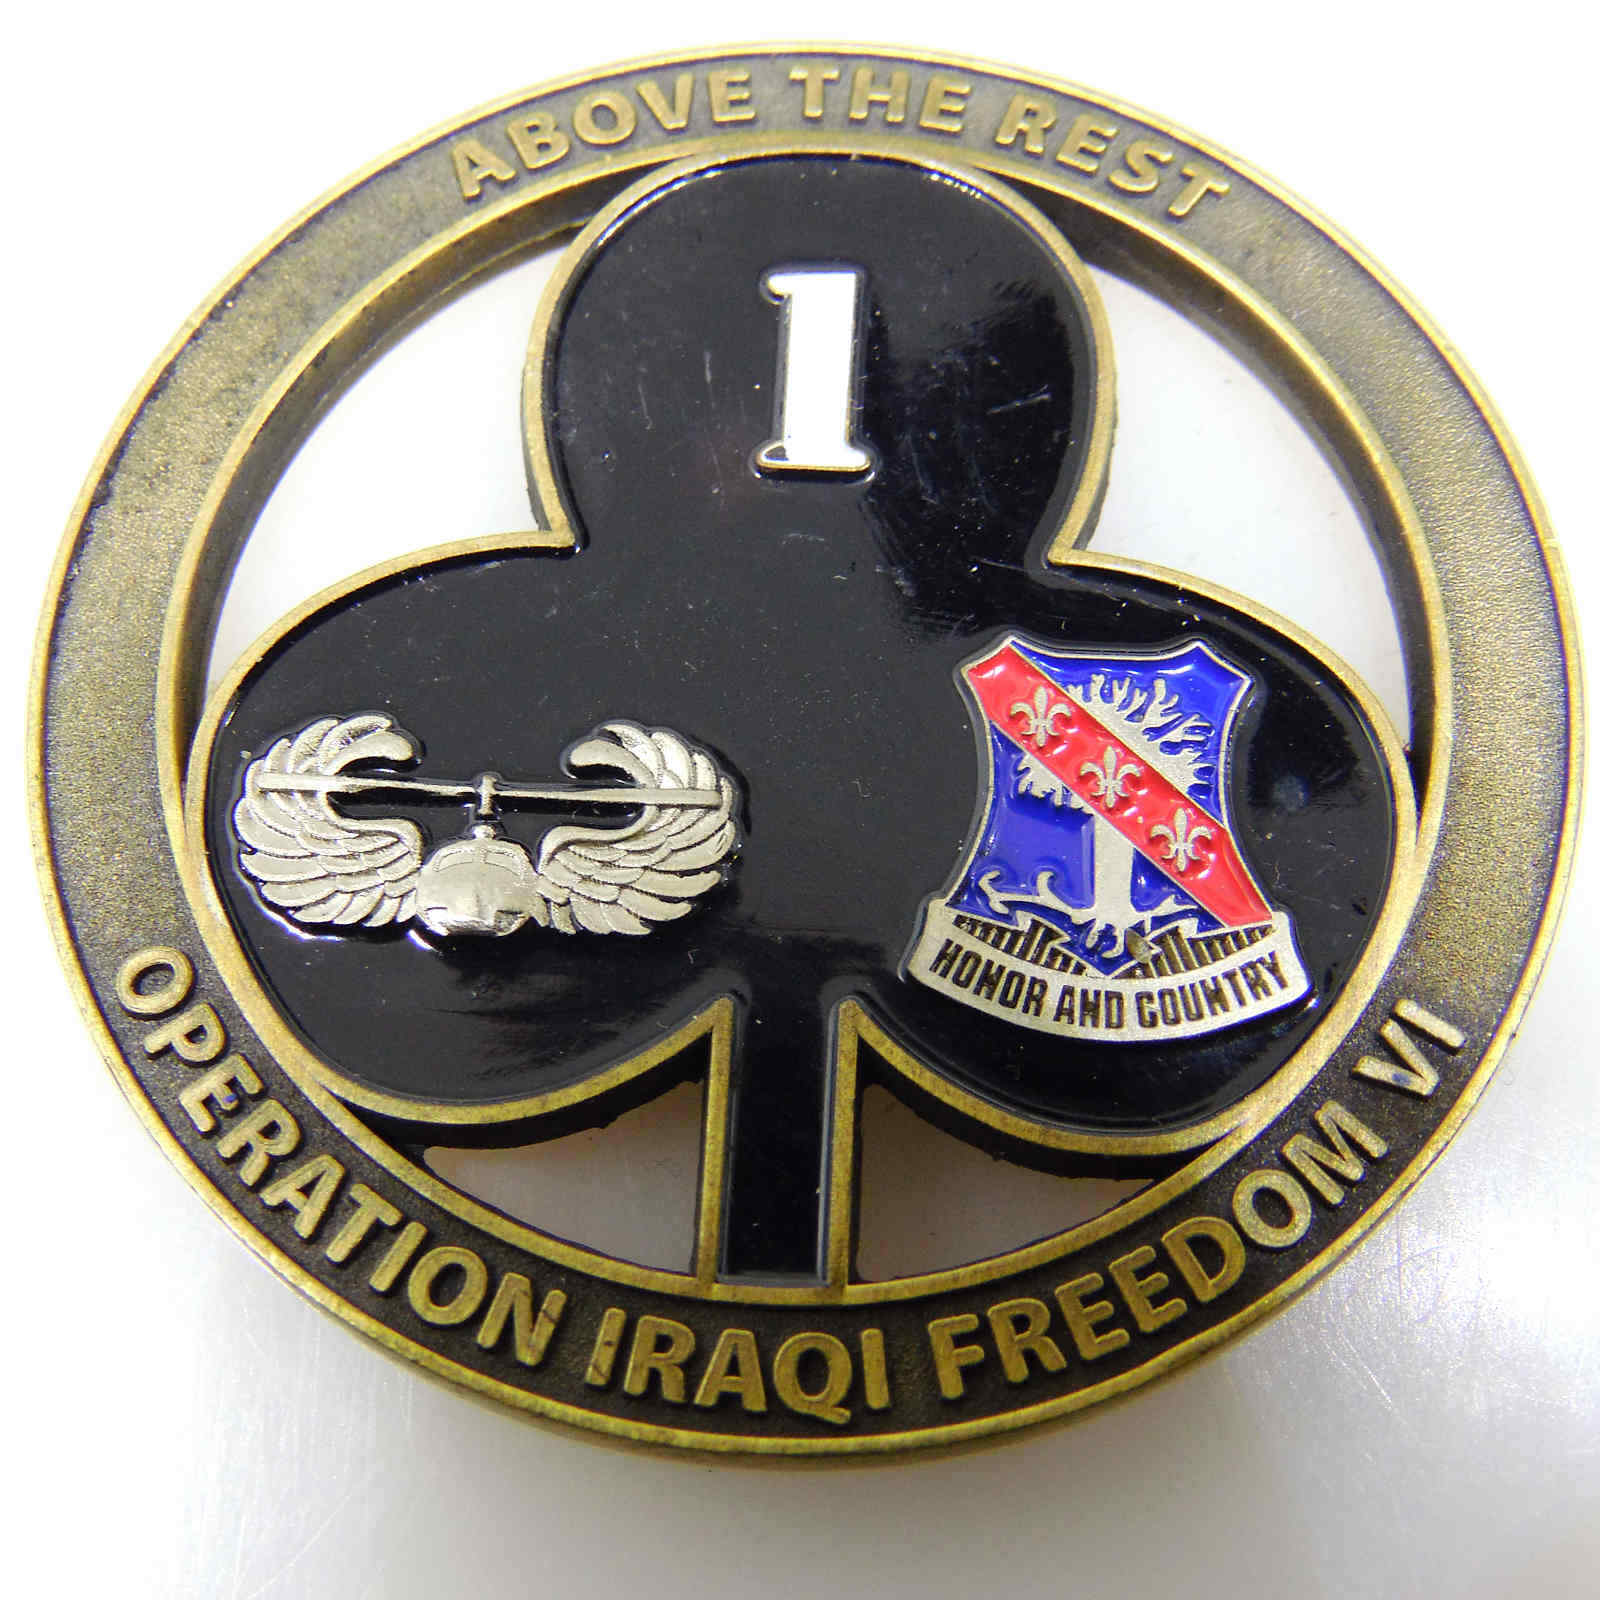 ABOVE THE REST OPERATION IRAQI FREEDOM VI TF 1-327 IN CHALLENGE COIN